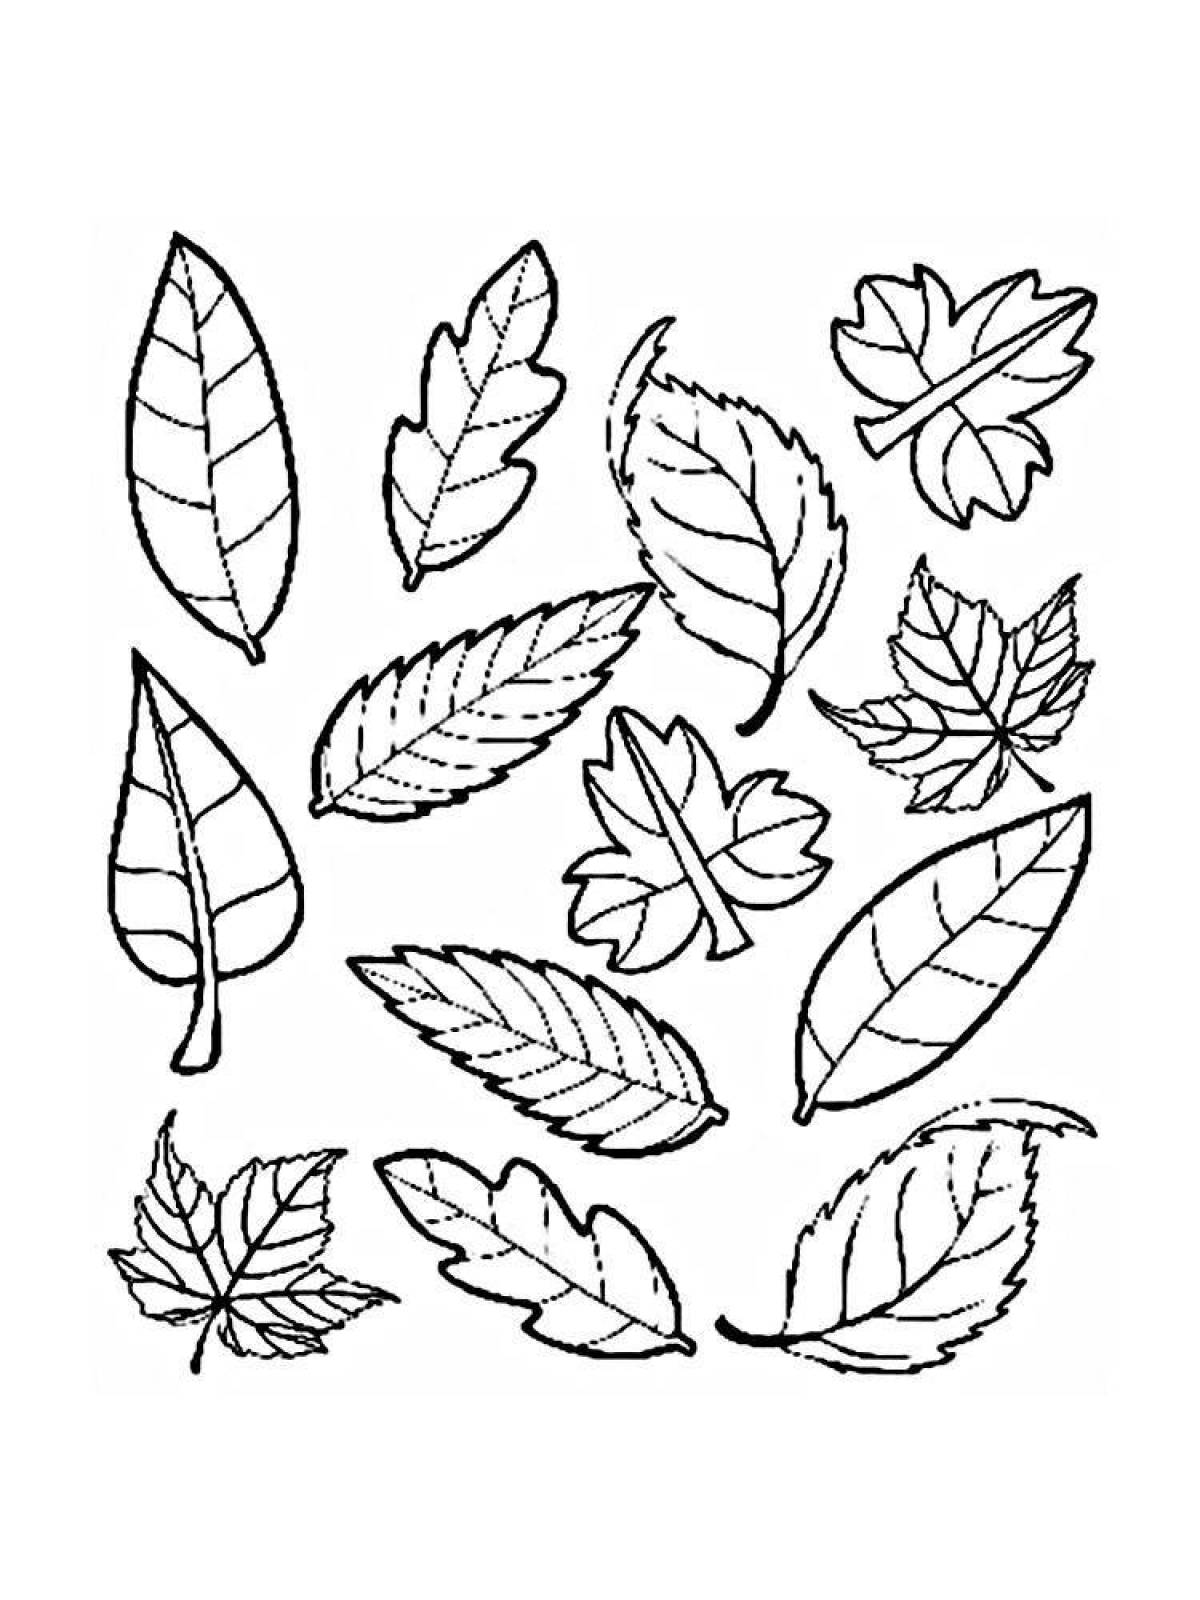 Colorful leaves coloring book for kids